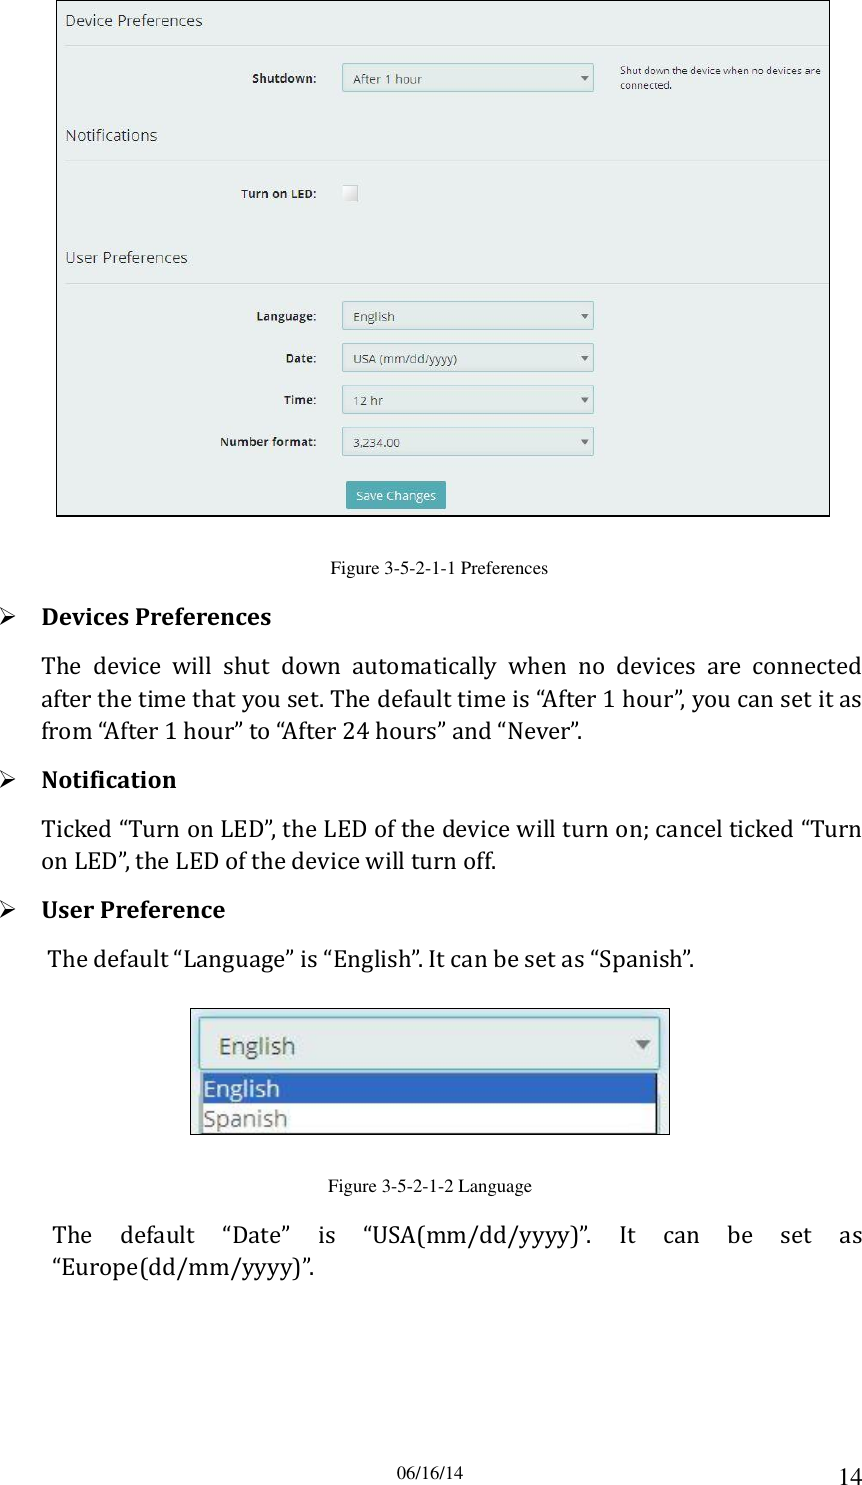 06/16/14 14  Figure 3-5-2-1-1 Preferences  Devices Preferences The  device  will  shut  down  automatically  when  no  devices  are  connected after the time that you set. The default time is “After 1 hour”, you can set it as from “After 1 hour” to “After 24 hours” and “Never”.  Notification Ticked “Turn on LED”, the LED of the device will turn on; cancel ticked “Turn on LED”, the LED of the device will turn off.  User Preference The default “Language” is “English”. It can be set as “Spanish”.  Figure 3-5-2-1-2 Language The  default  “Date”  is  “USA(mm/dd/yyyy)”.  It  can  be  set  as “Europe(dd/mm/yyyy)”. 